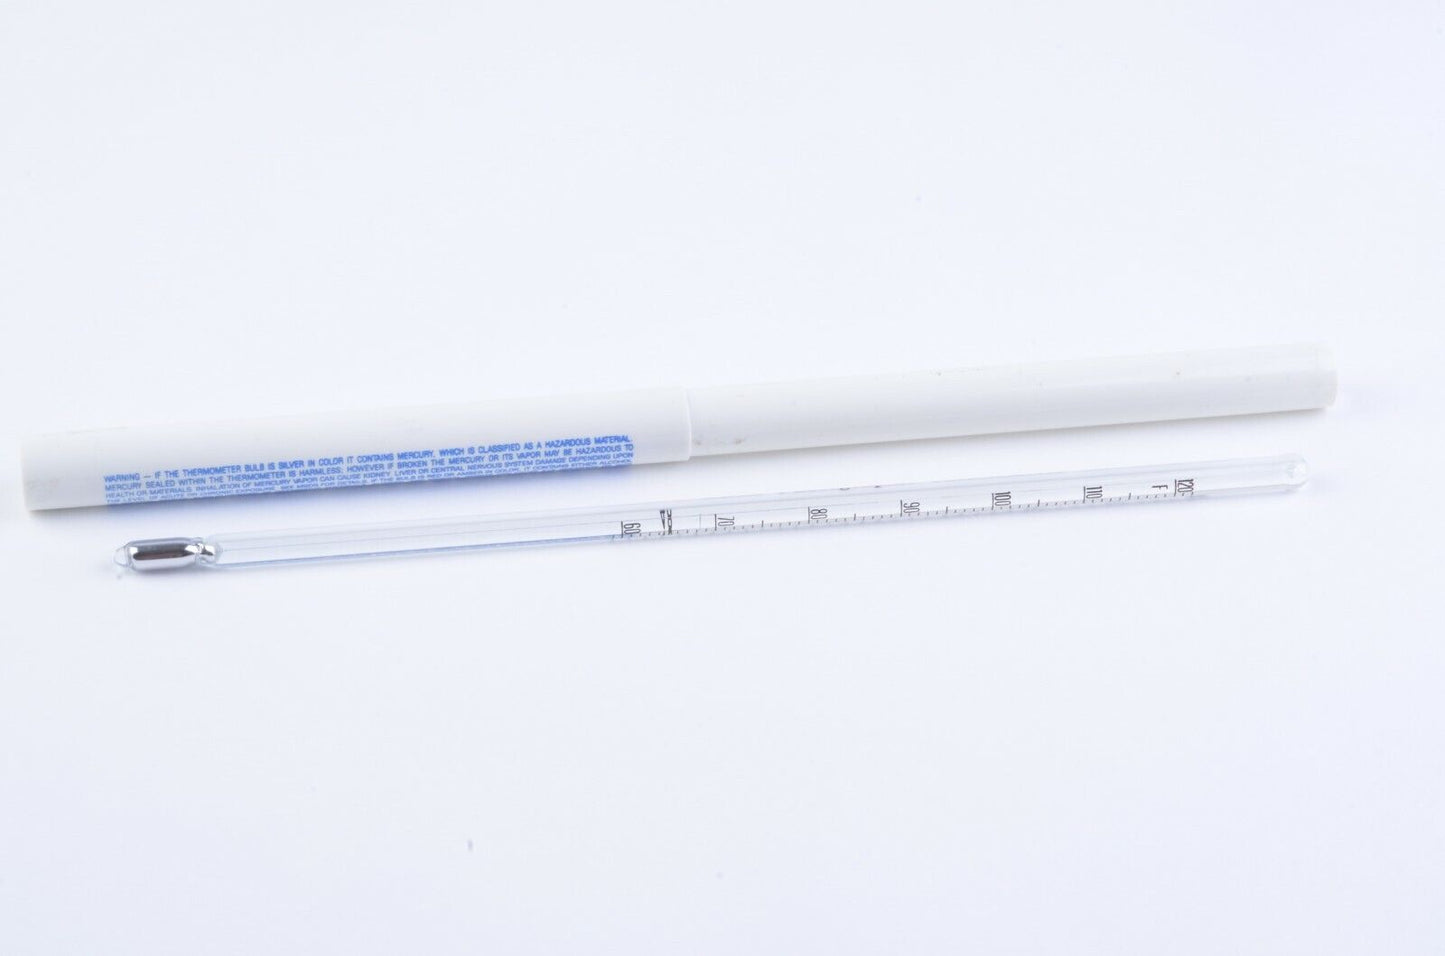 VERY CLEAN & TESTED 60-120 DEGREE F BRANNAN PHOTO GLASS THERMOMETER, BOXED 9"